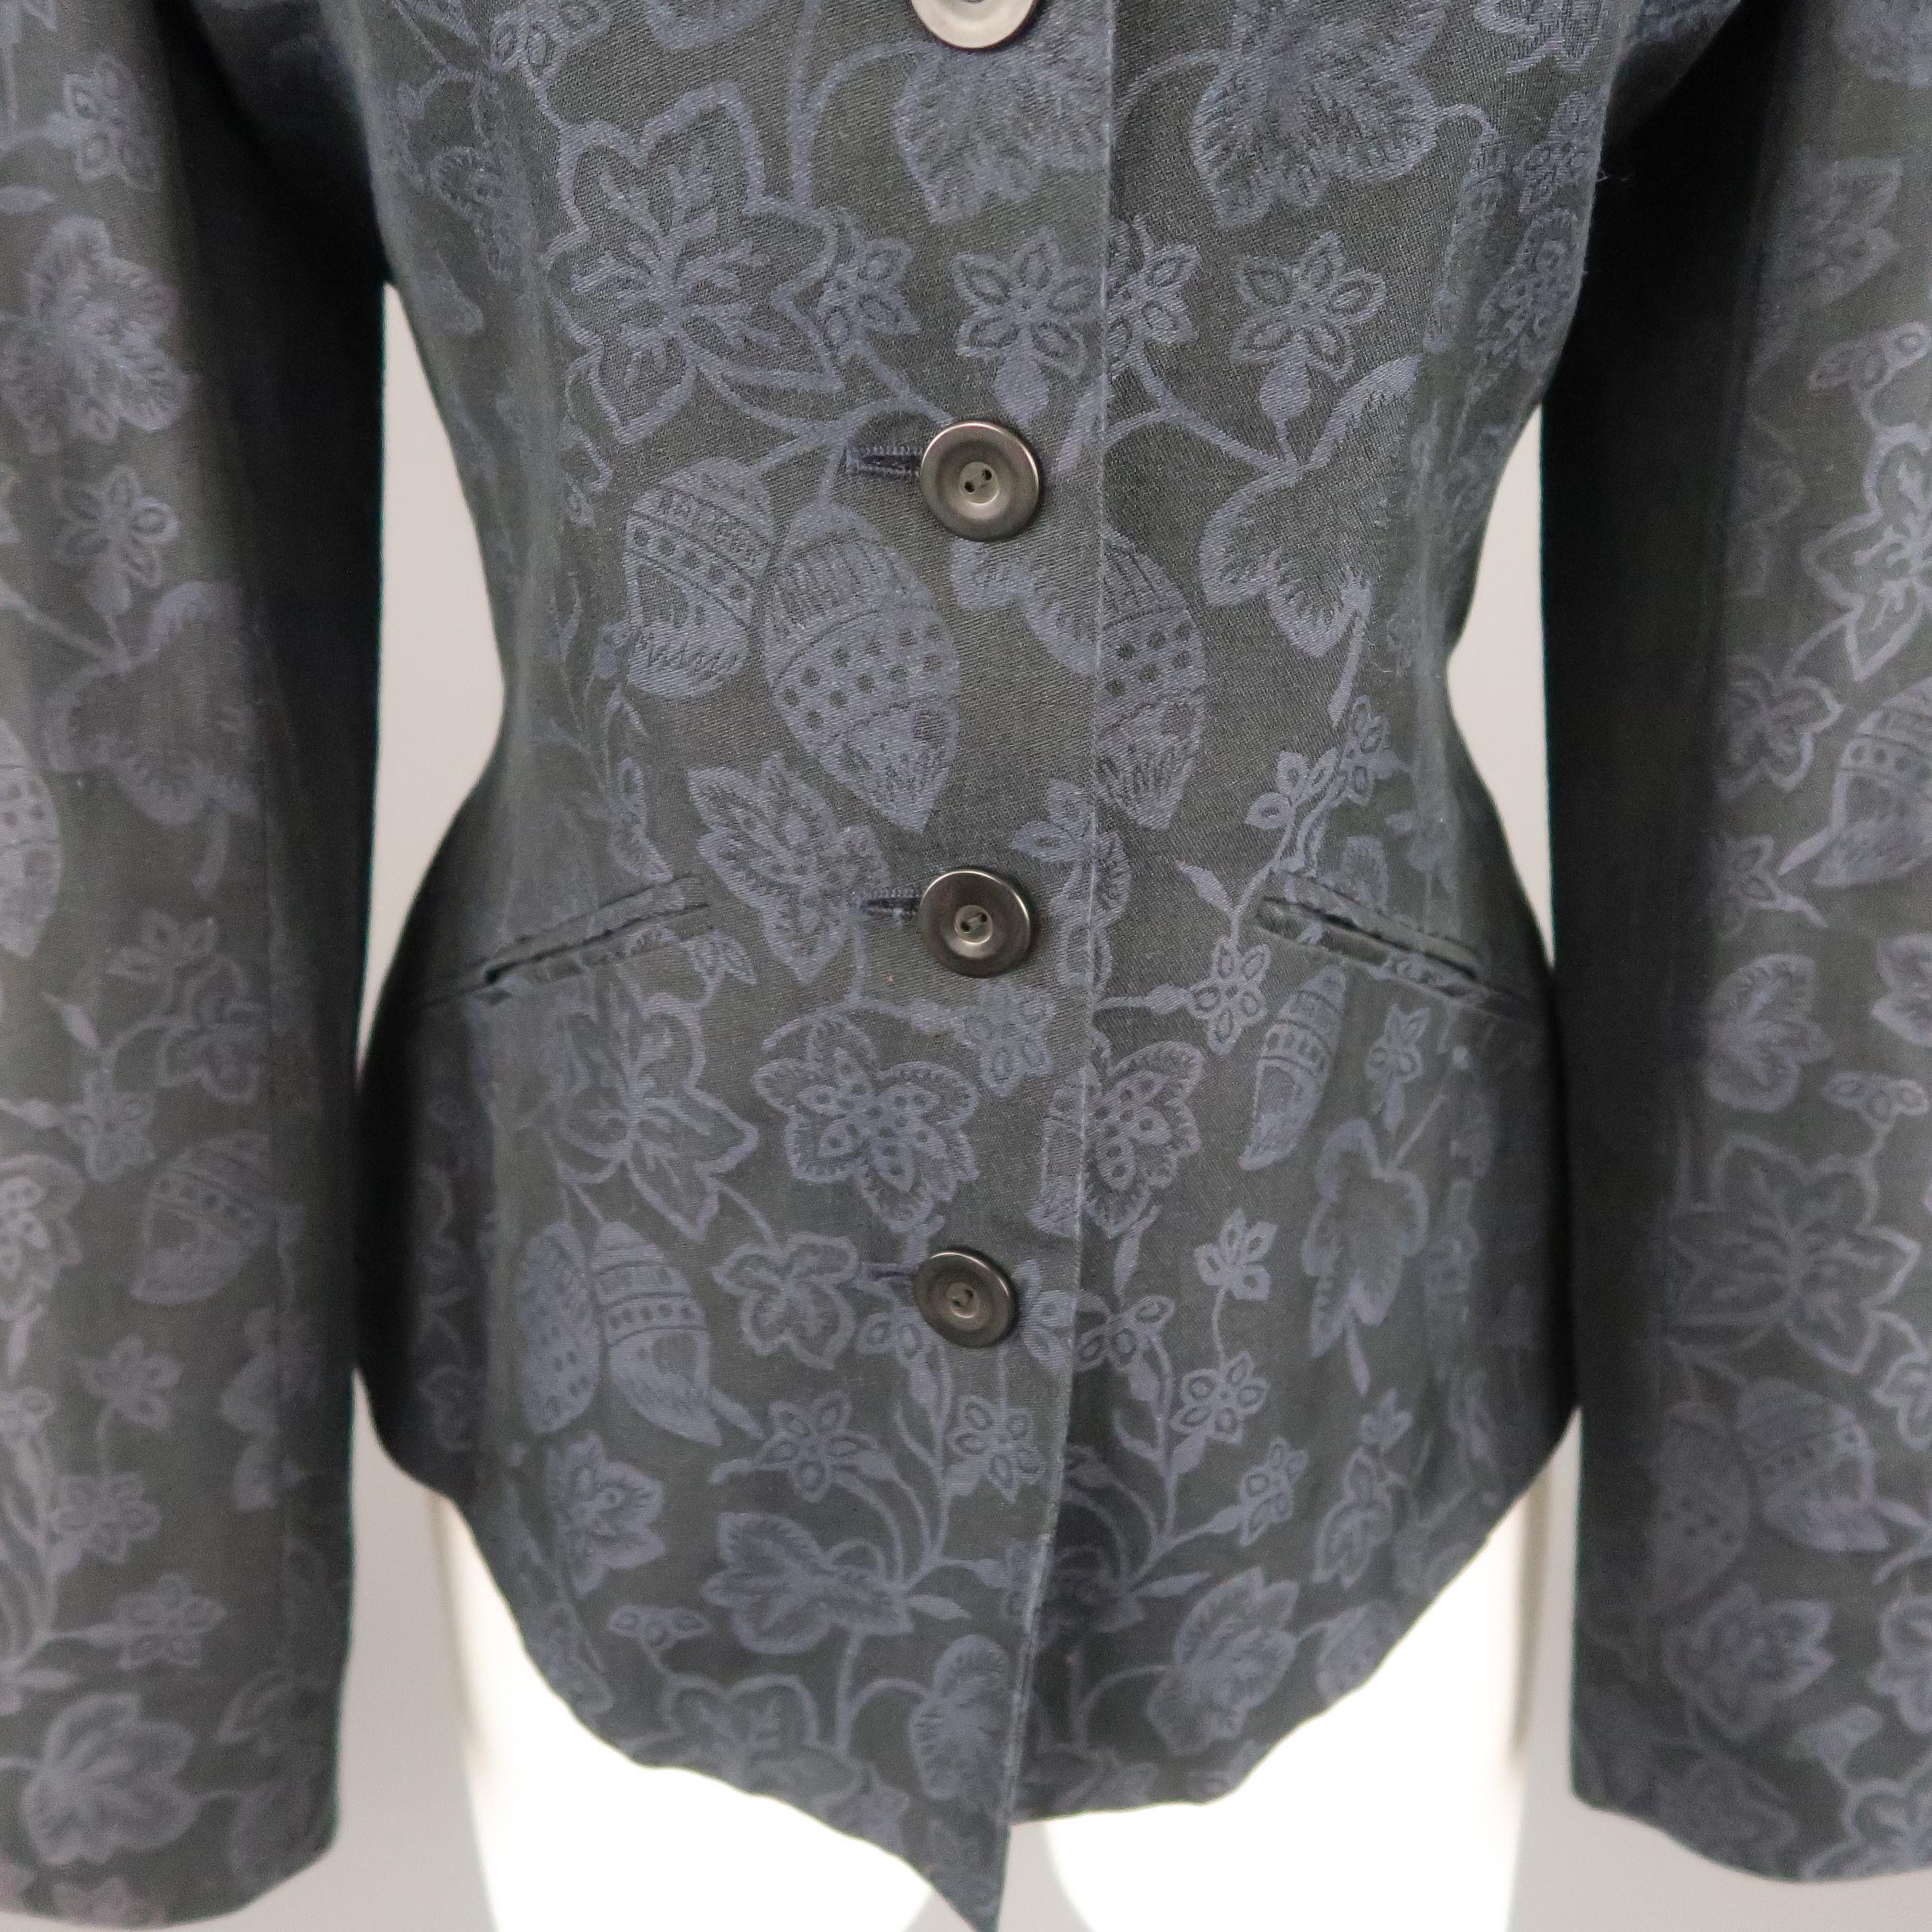 trim-detail embroidered jacket by kenzo